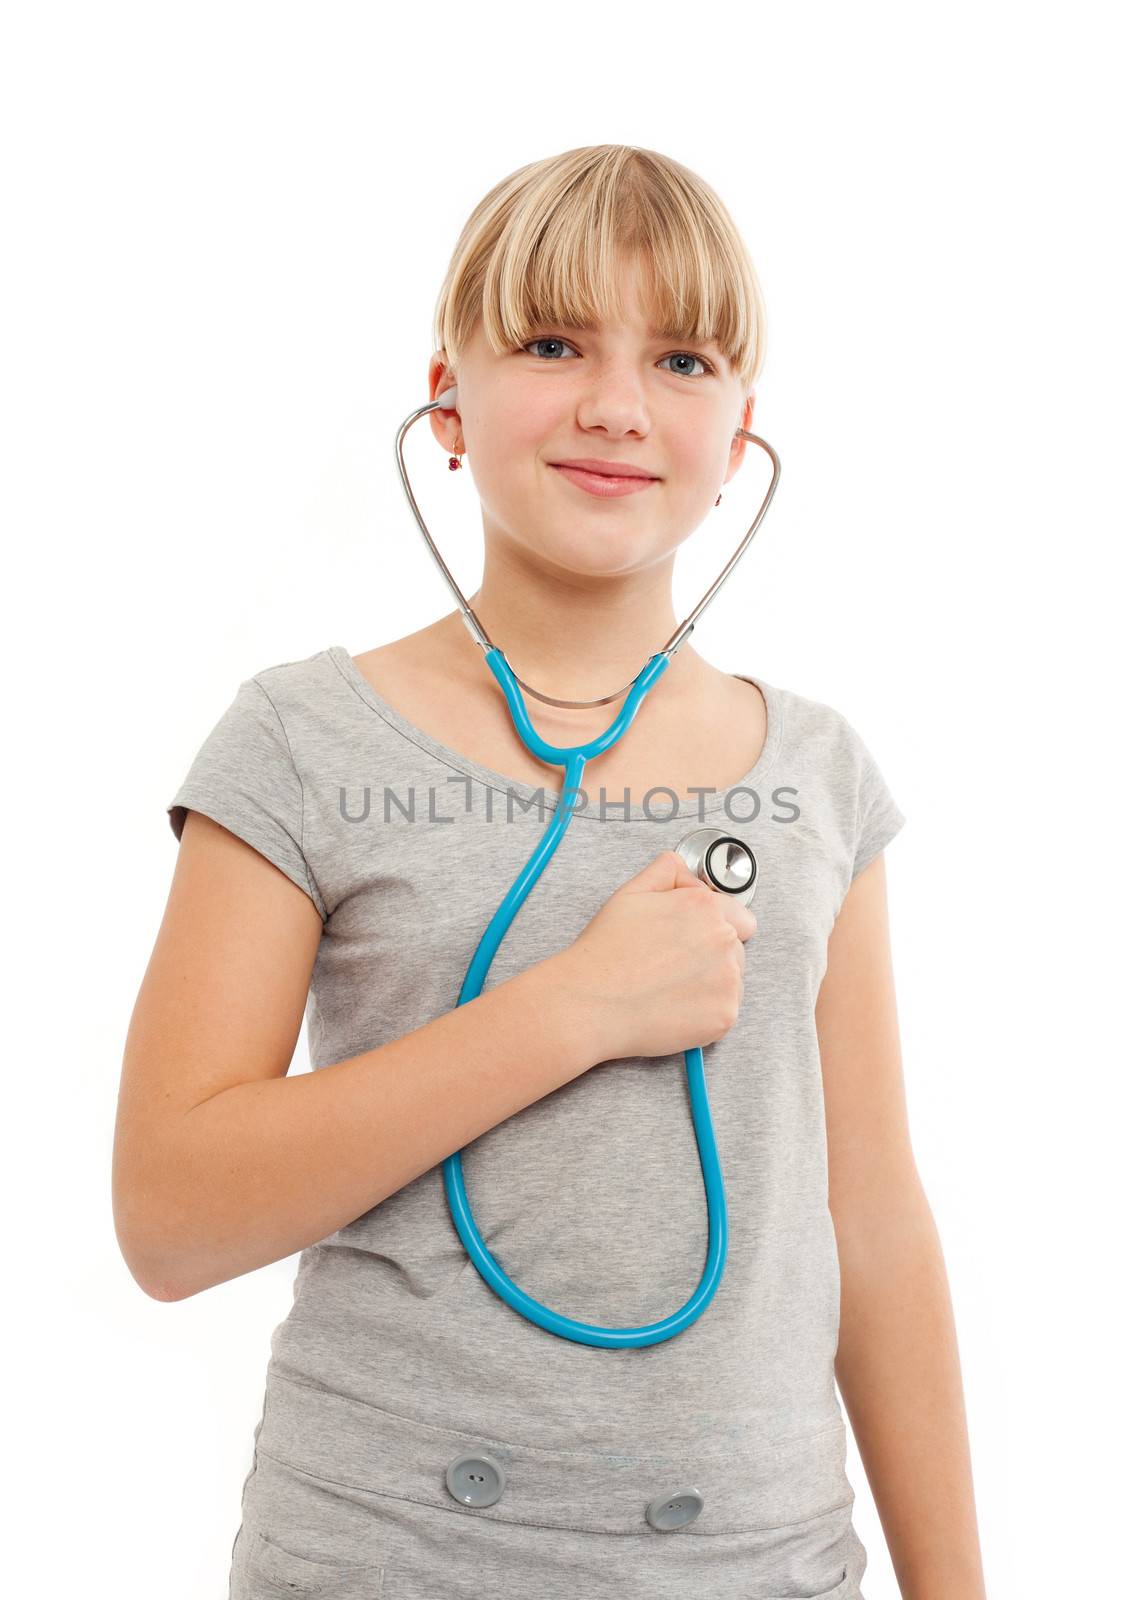 Self doctor - Young female checking herself wiht a stethoscope 